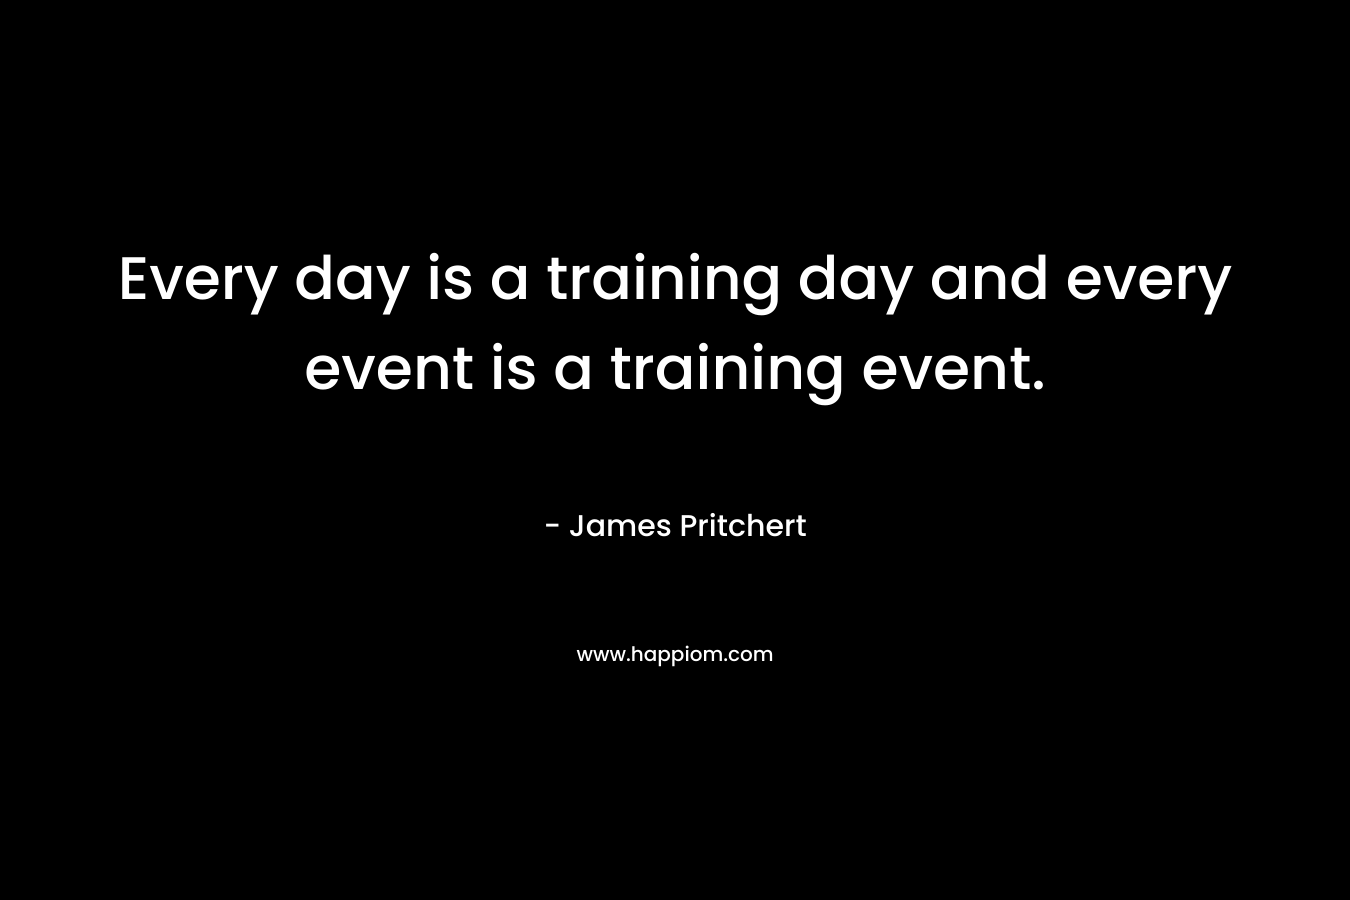 Every day is a training day and every event is a training event.